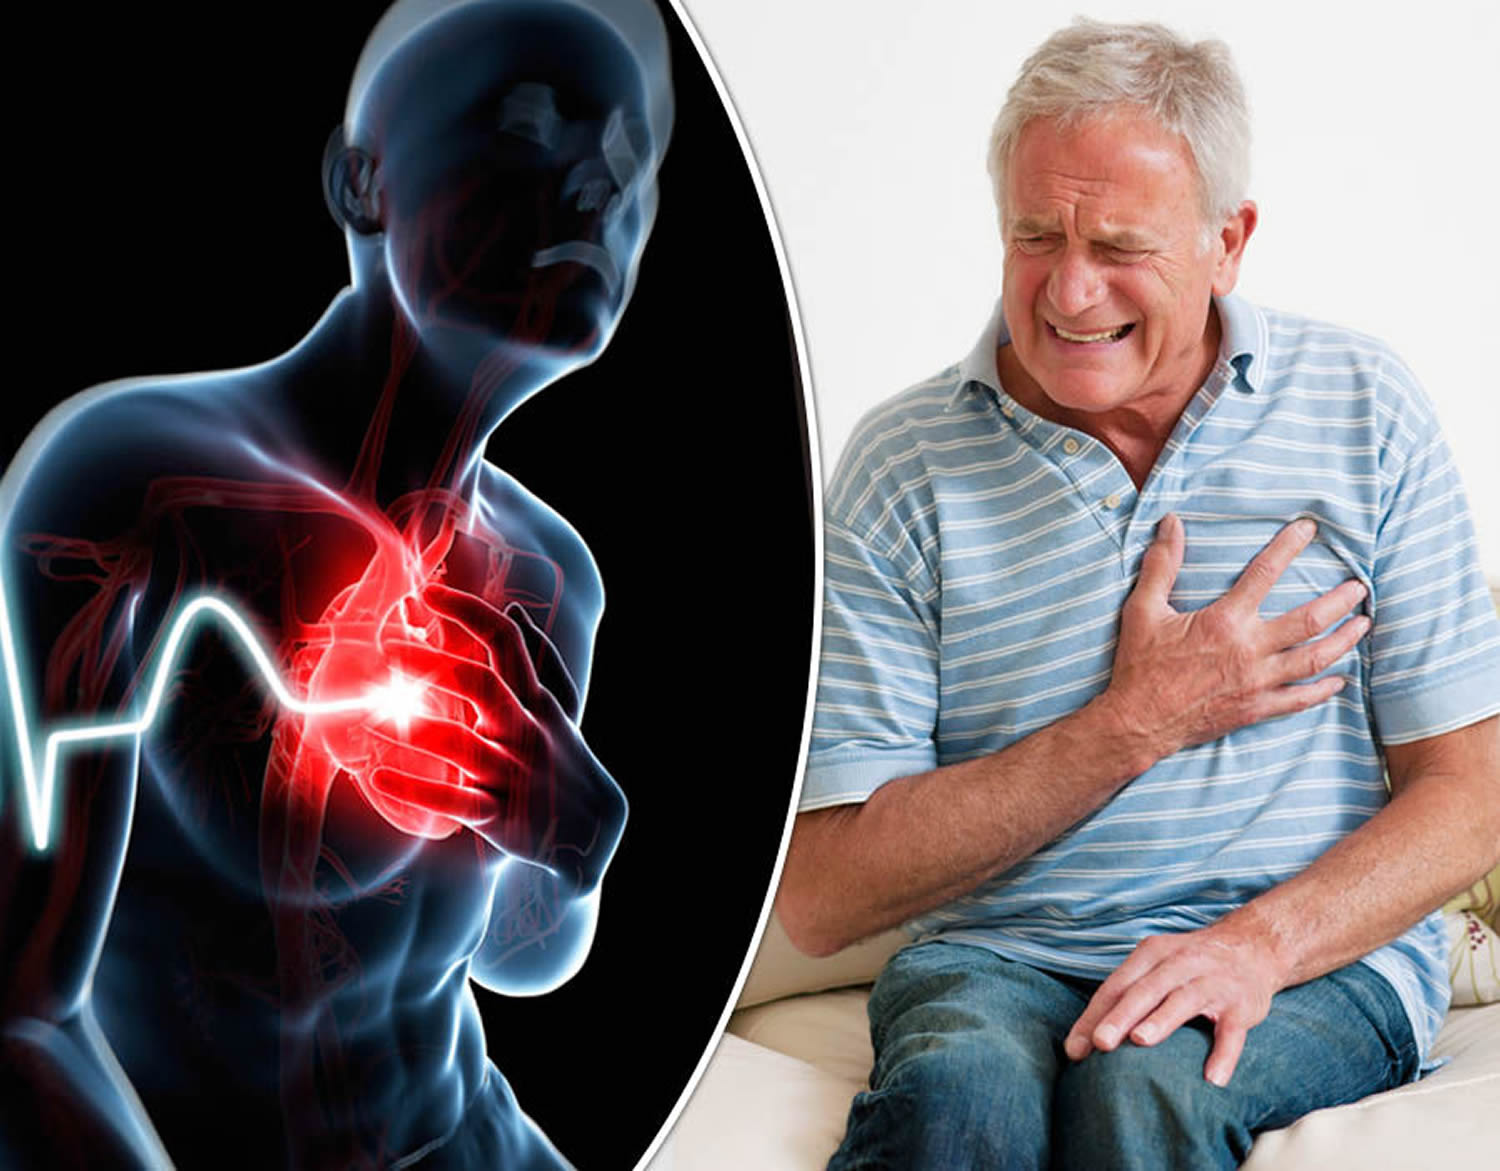 Signs & Symptoms of a Heart Attack. What You Should Do To Save Life